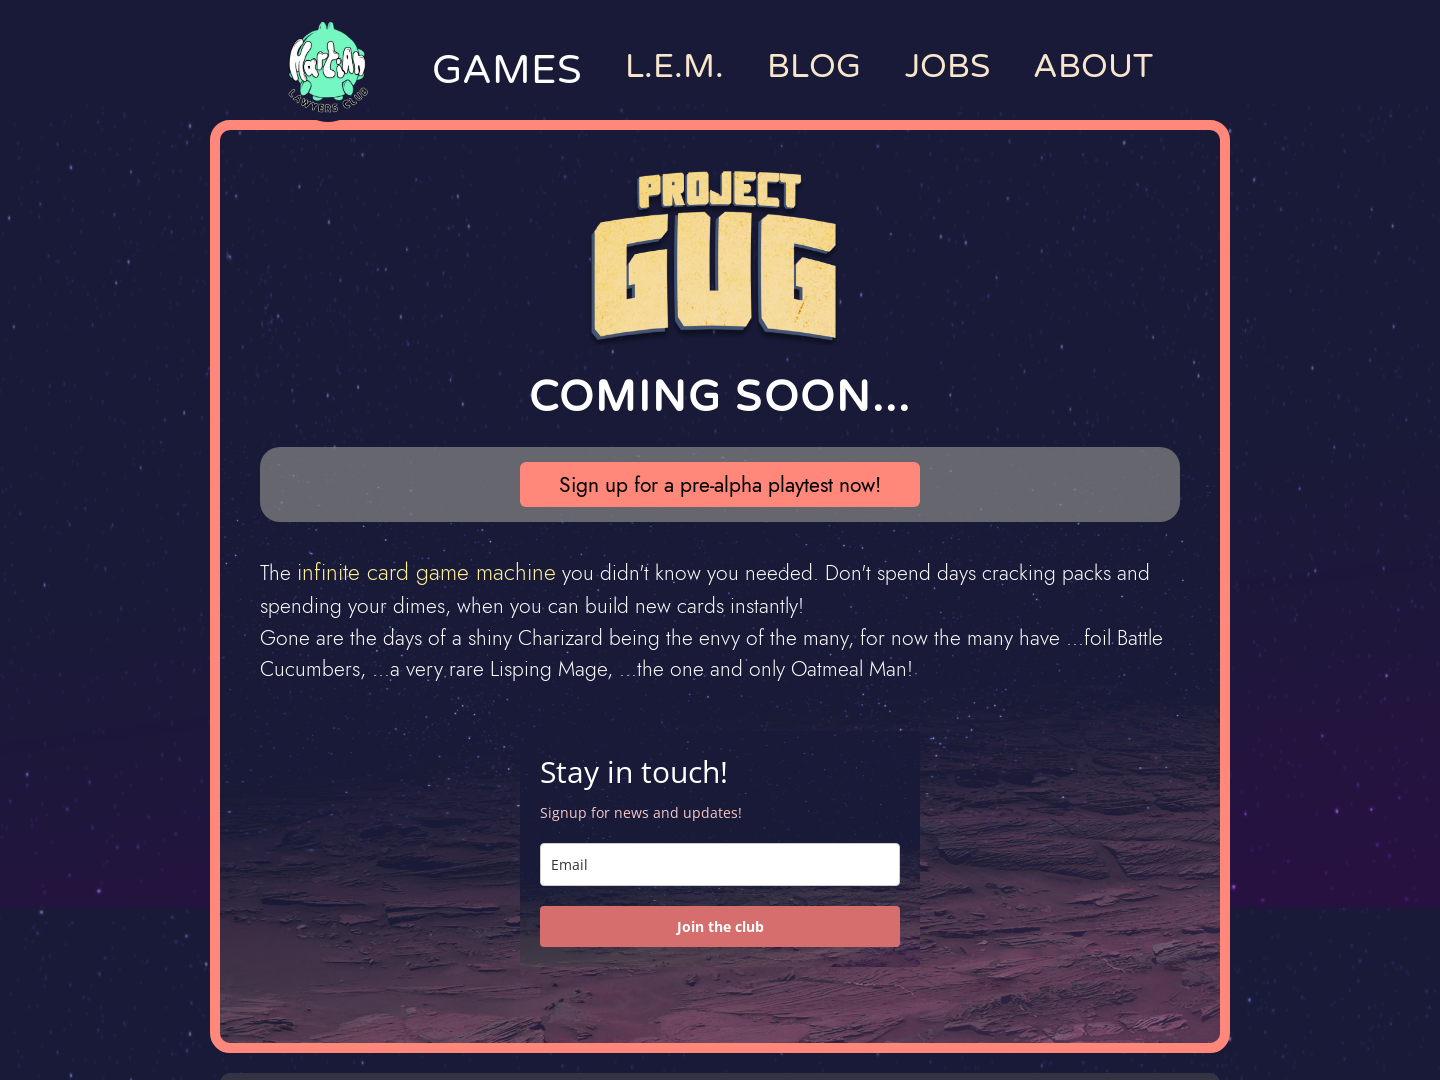 "Martian Lawyers Club Raises $2.2M for AI-Powered Game Personalization"